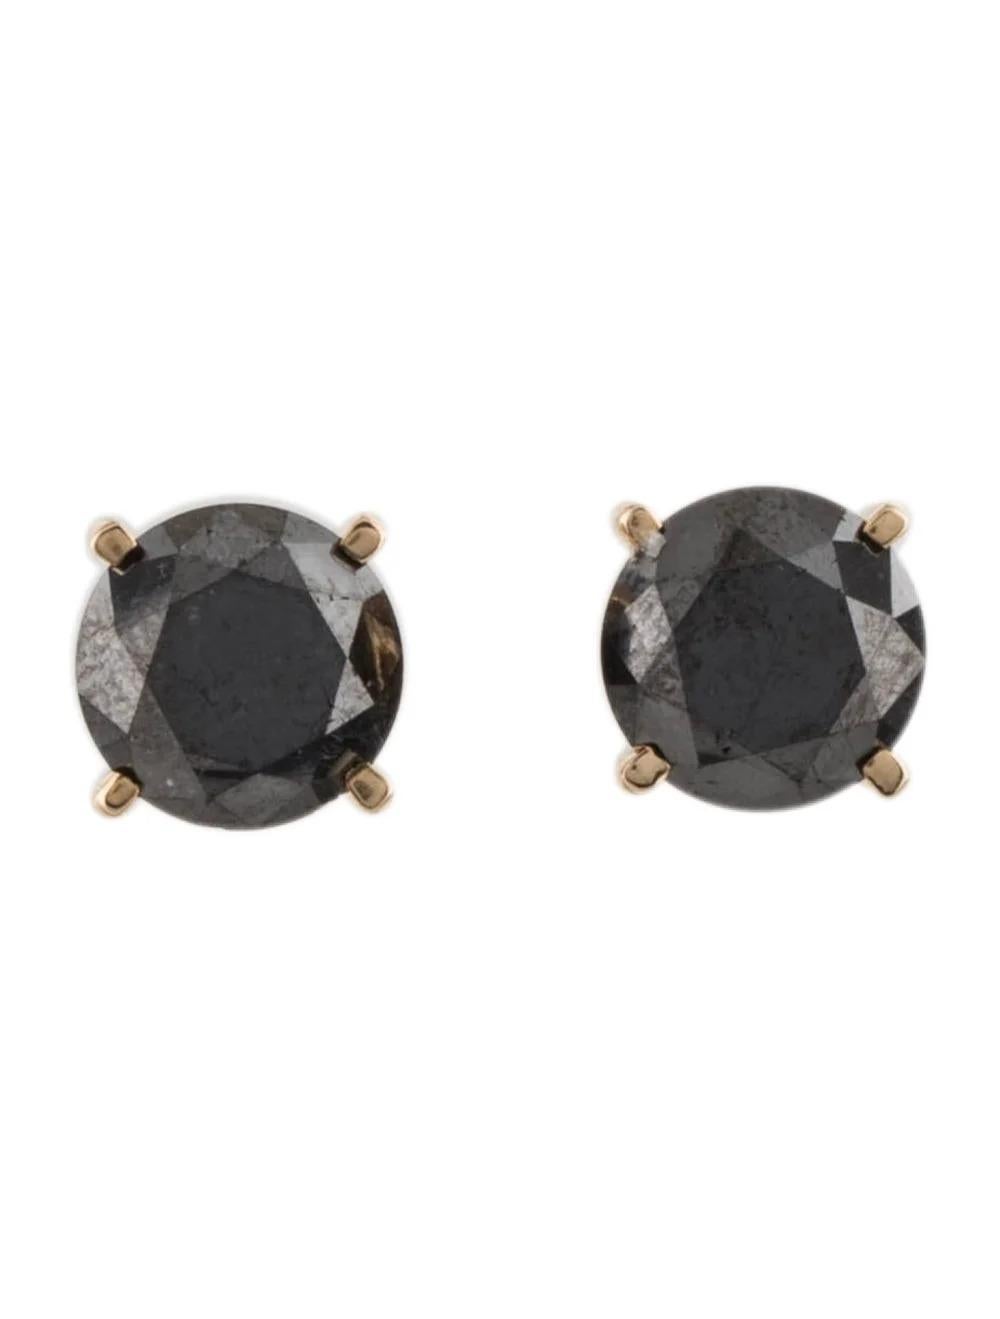 Elevate your elegance with these exquisite 14K Yellow Gold Diamond Stud Earrings. Crafted to perfection, these earrings are a testament to timeless sophistication and luxury.

Specifications:

* Material: 14K Yellow Gold
* Length: 0.25 inches
*